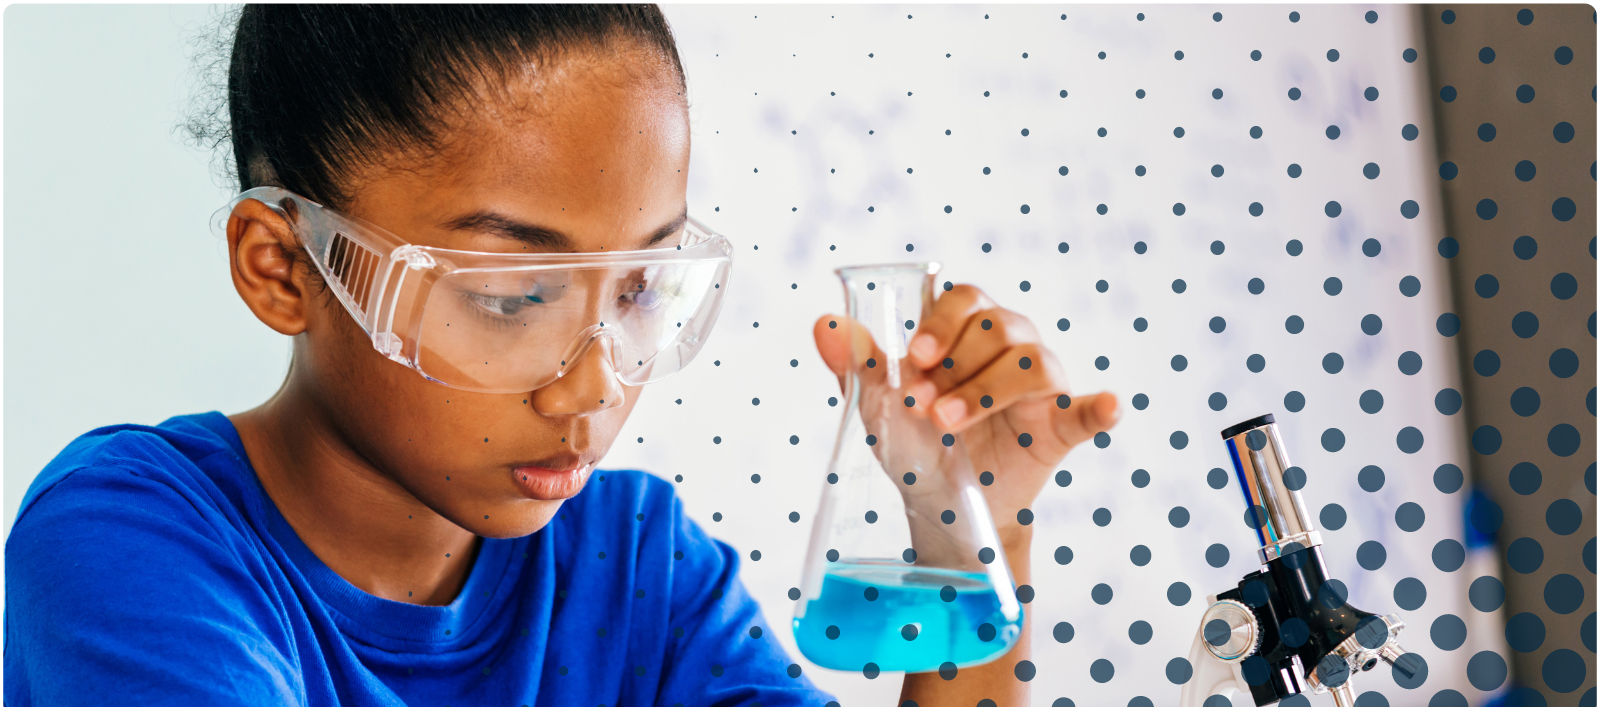 A young girl with safety goggles looking into a beaker with blue liquid inside of it